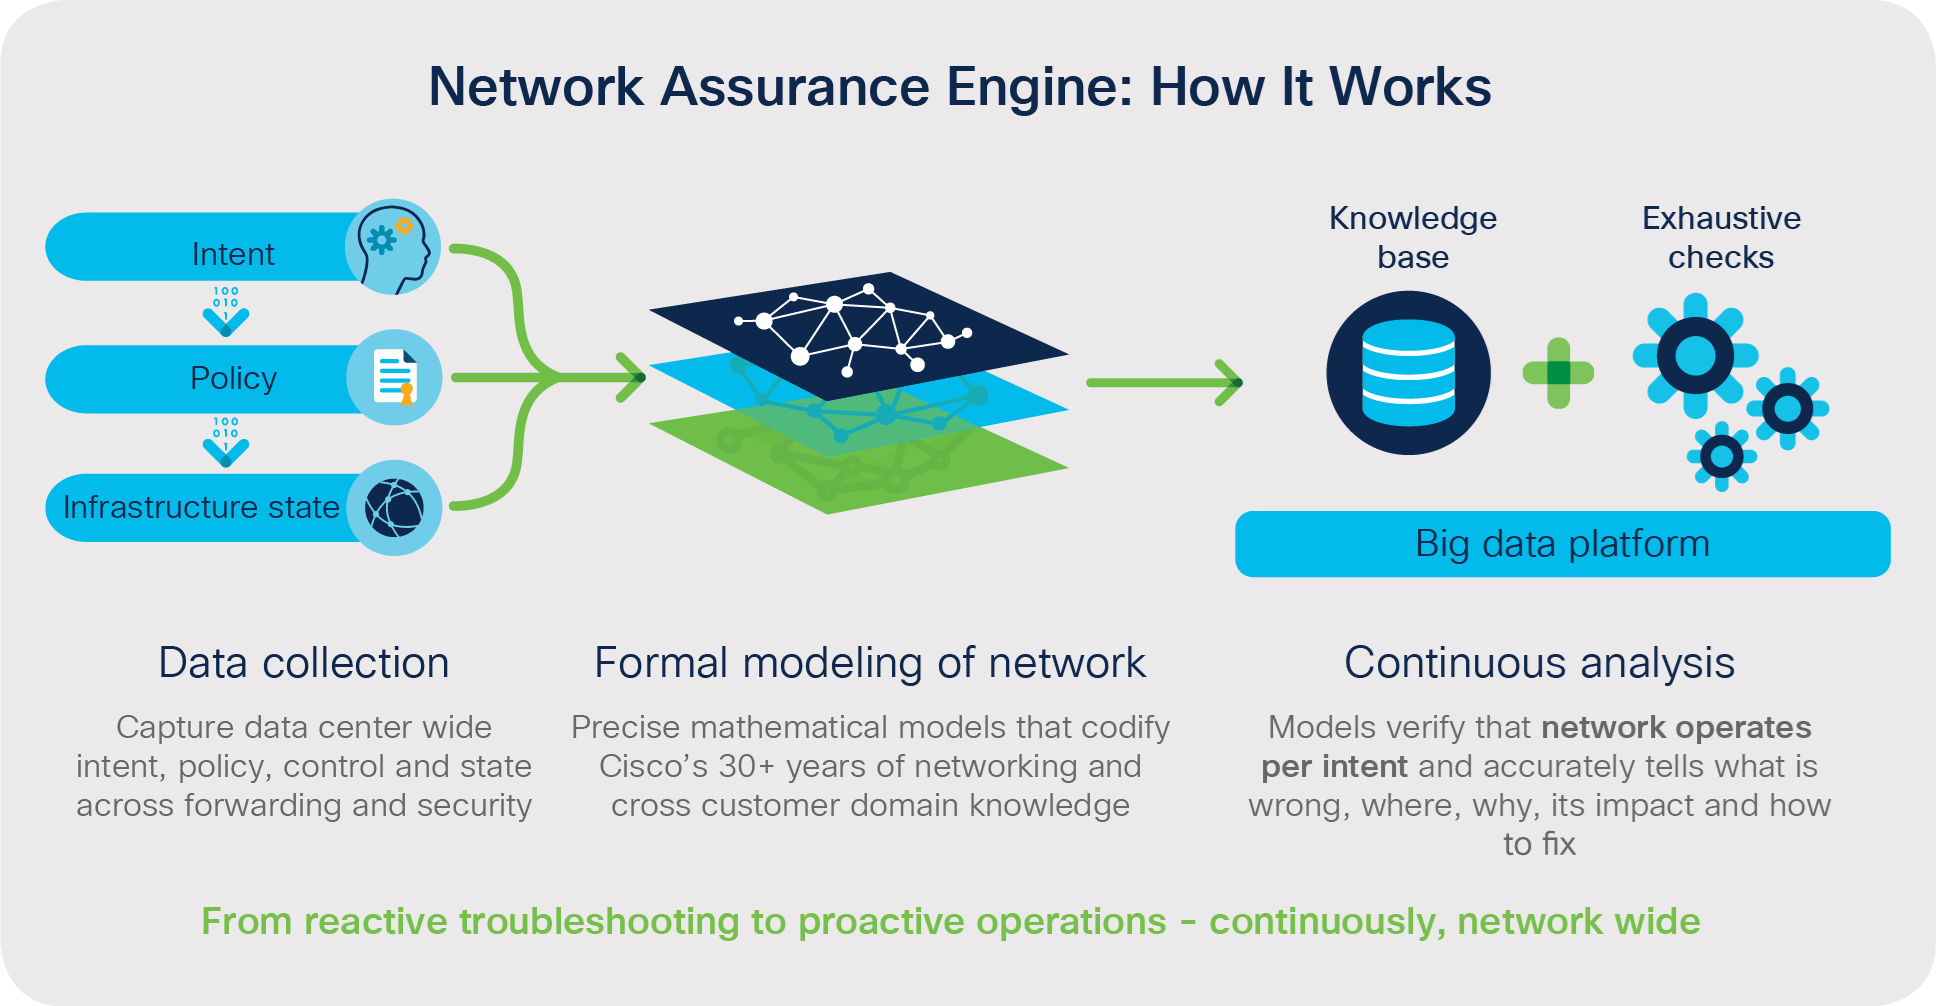 Network Assurance Engine: How It Works